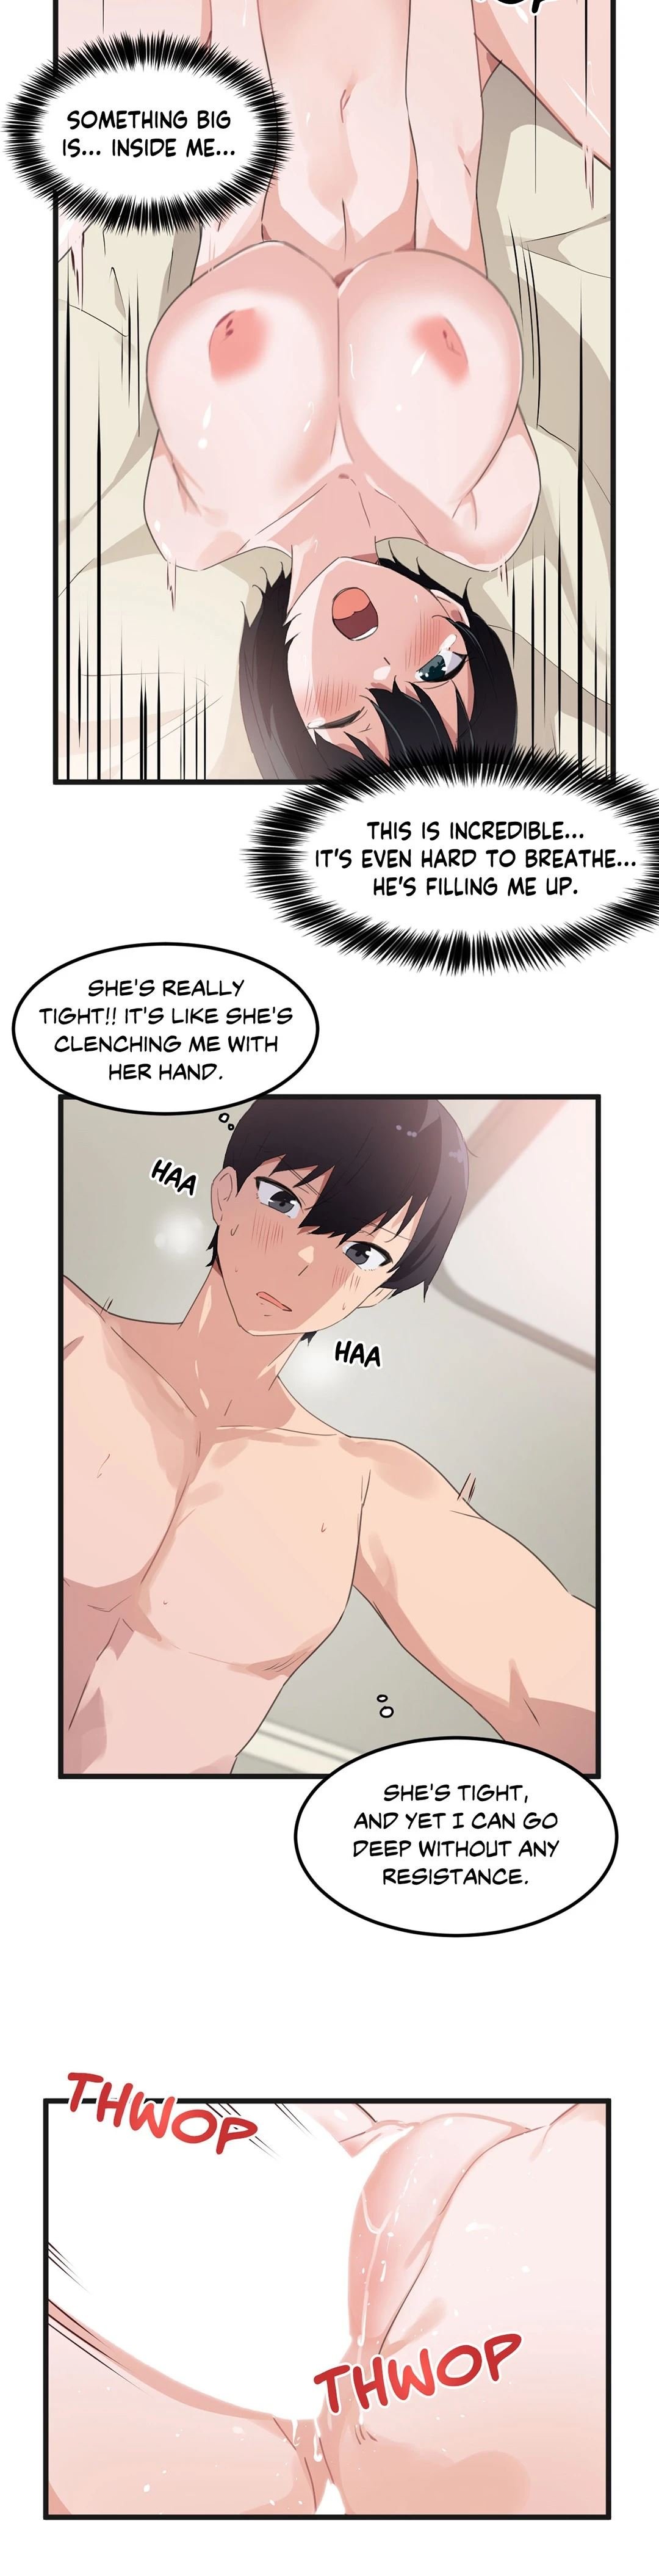 i-wanna-be-a-daughter-thief-chap-39-19